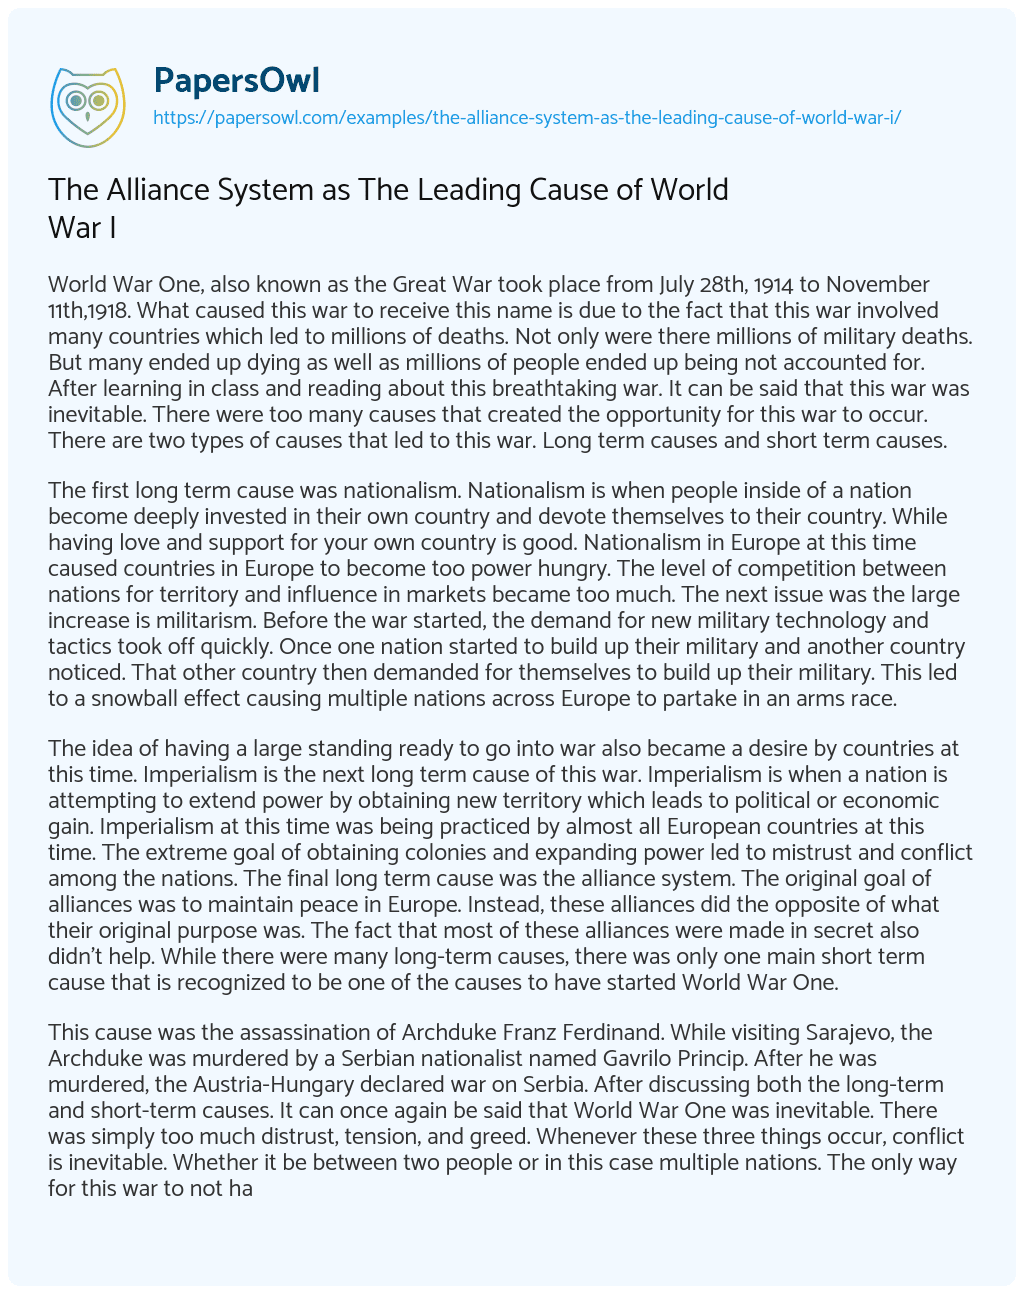 Essay on The Alliance System as the Leading Cause of World War i